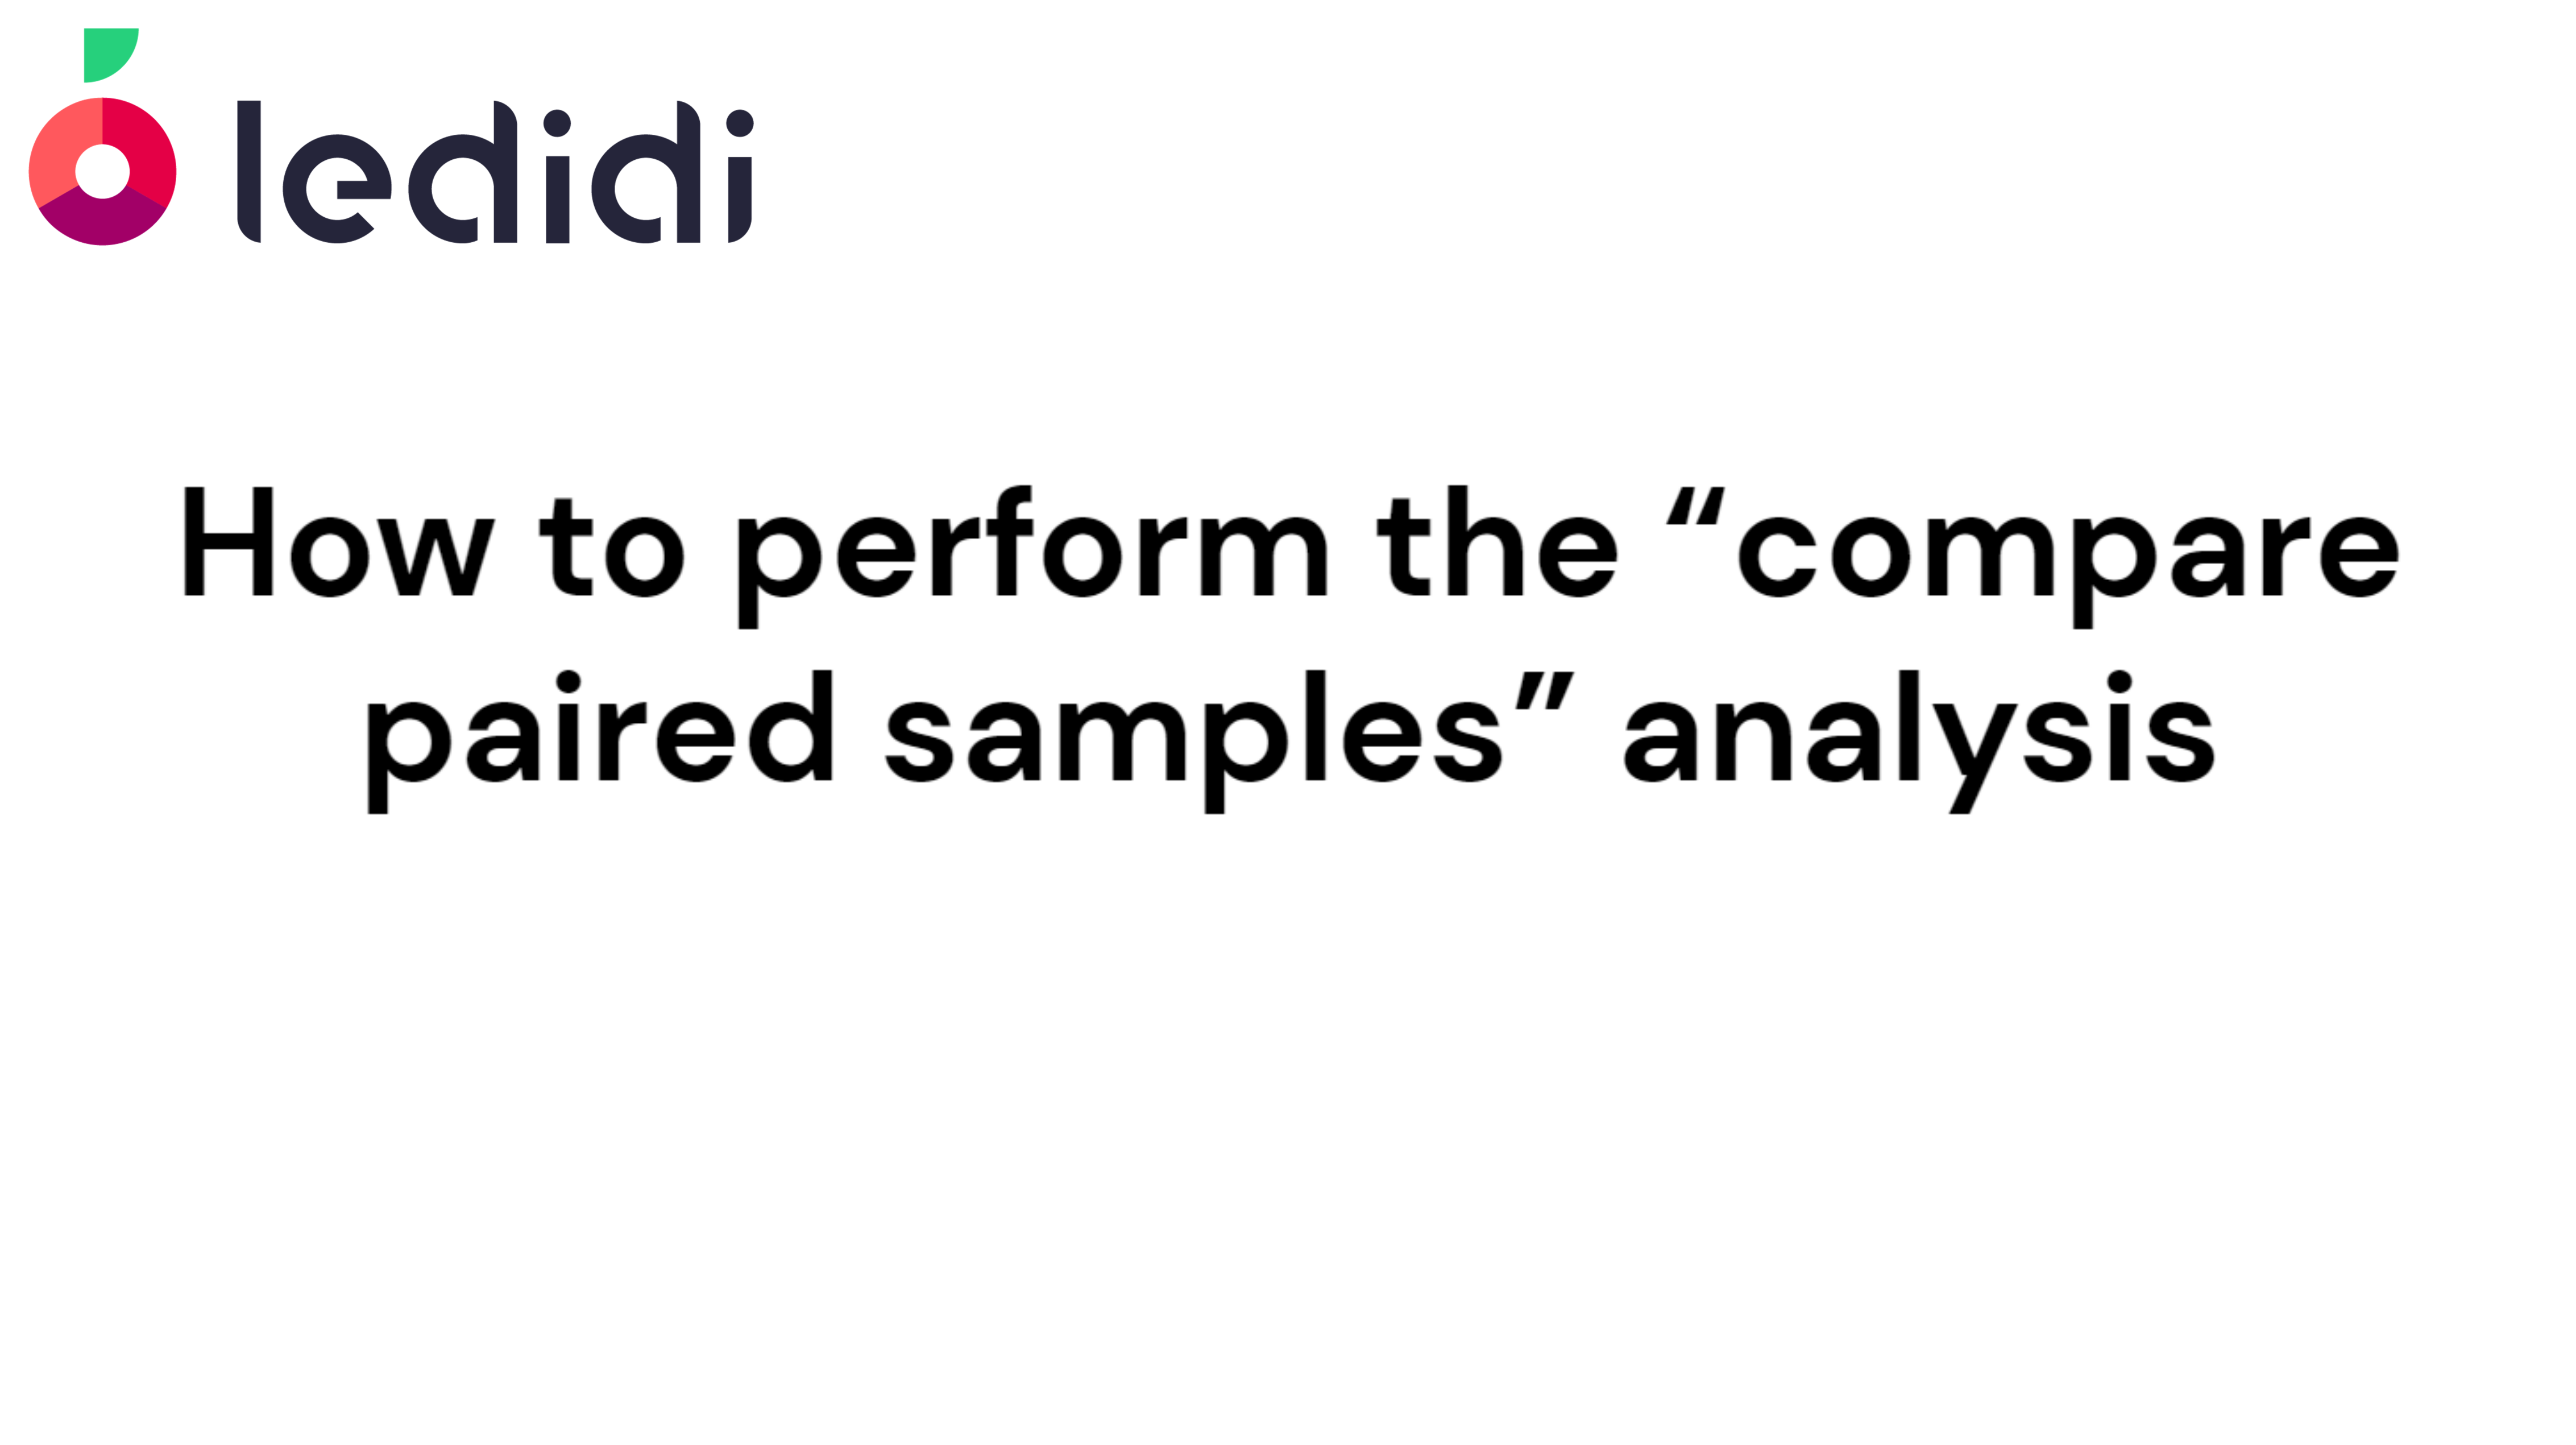 How to perform the "compare paired samples" analysis